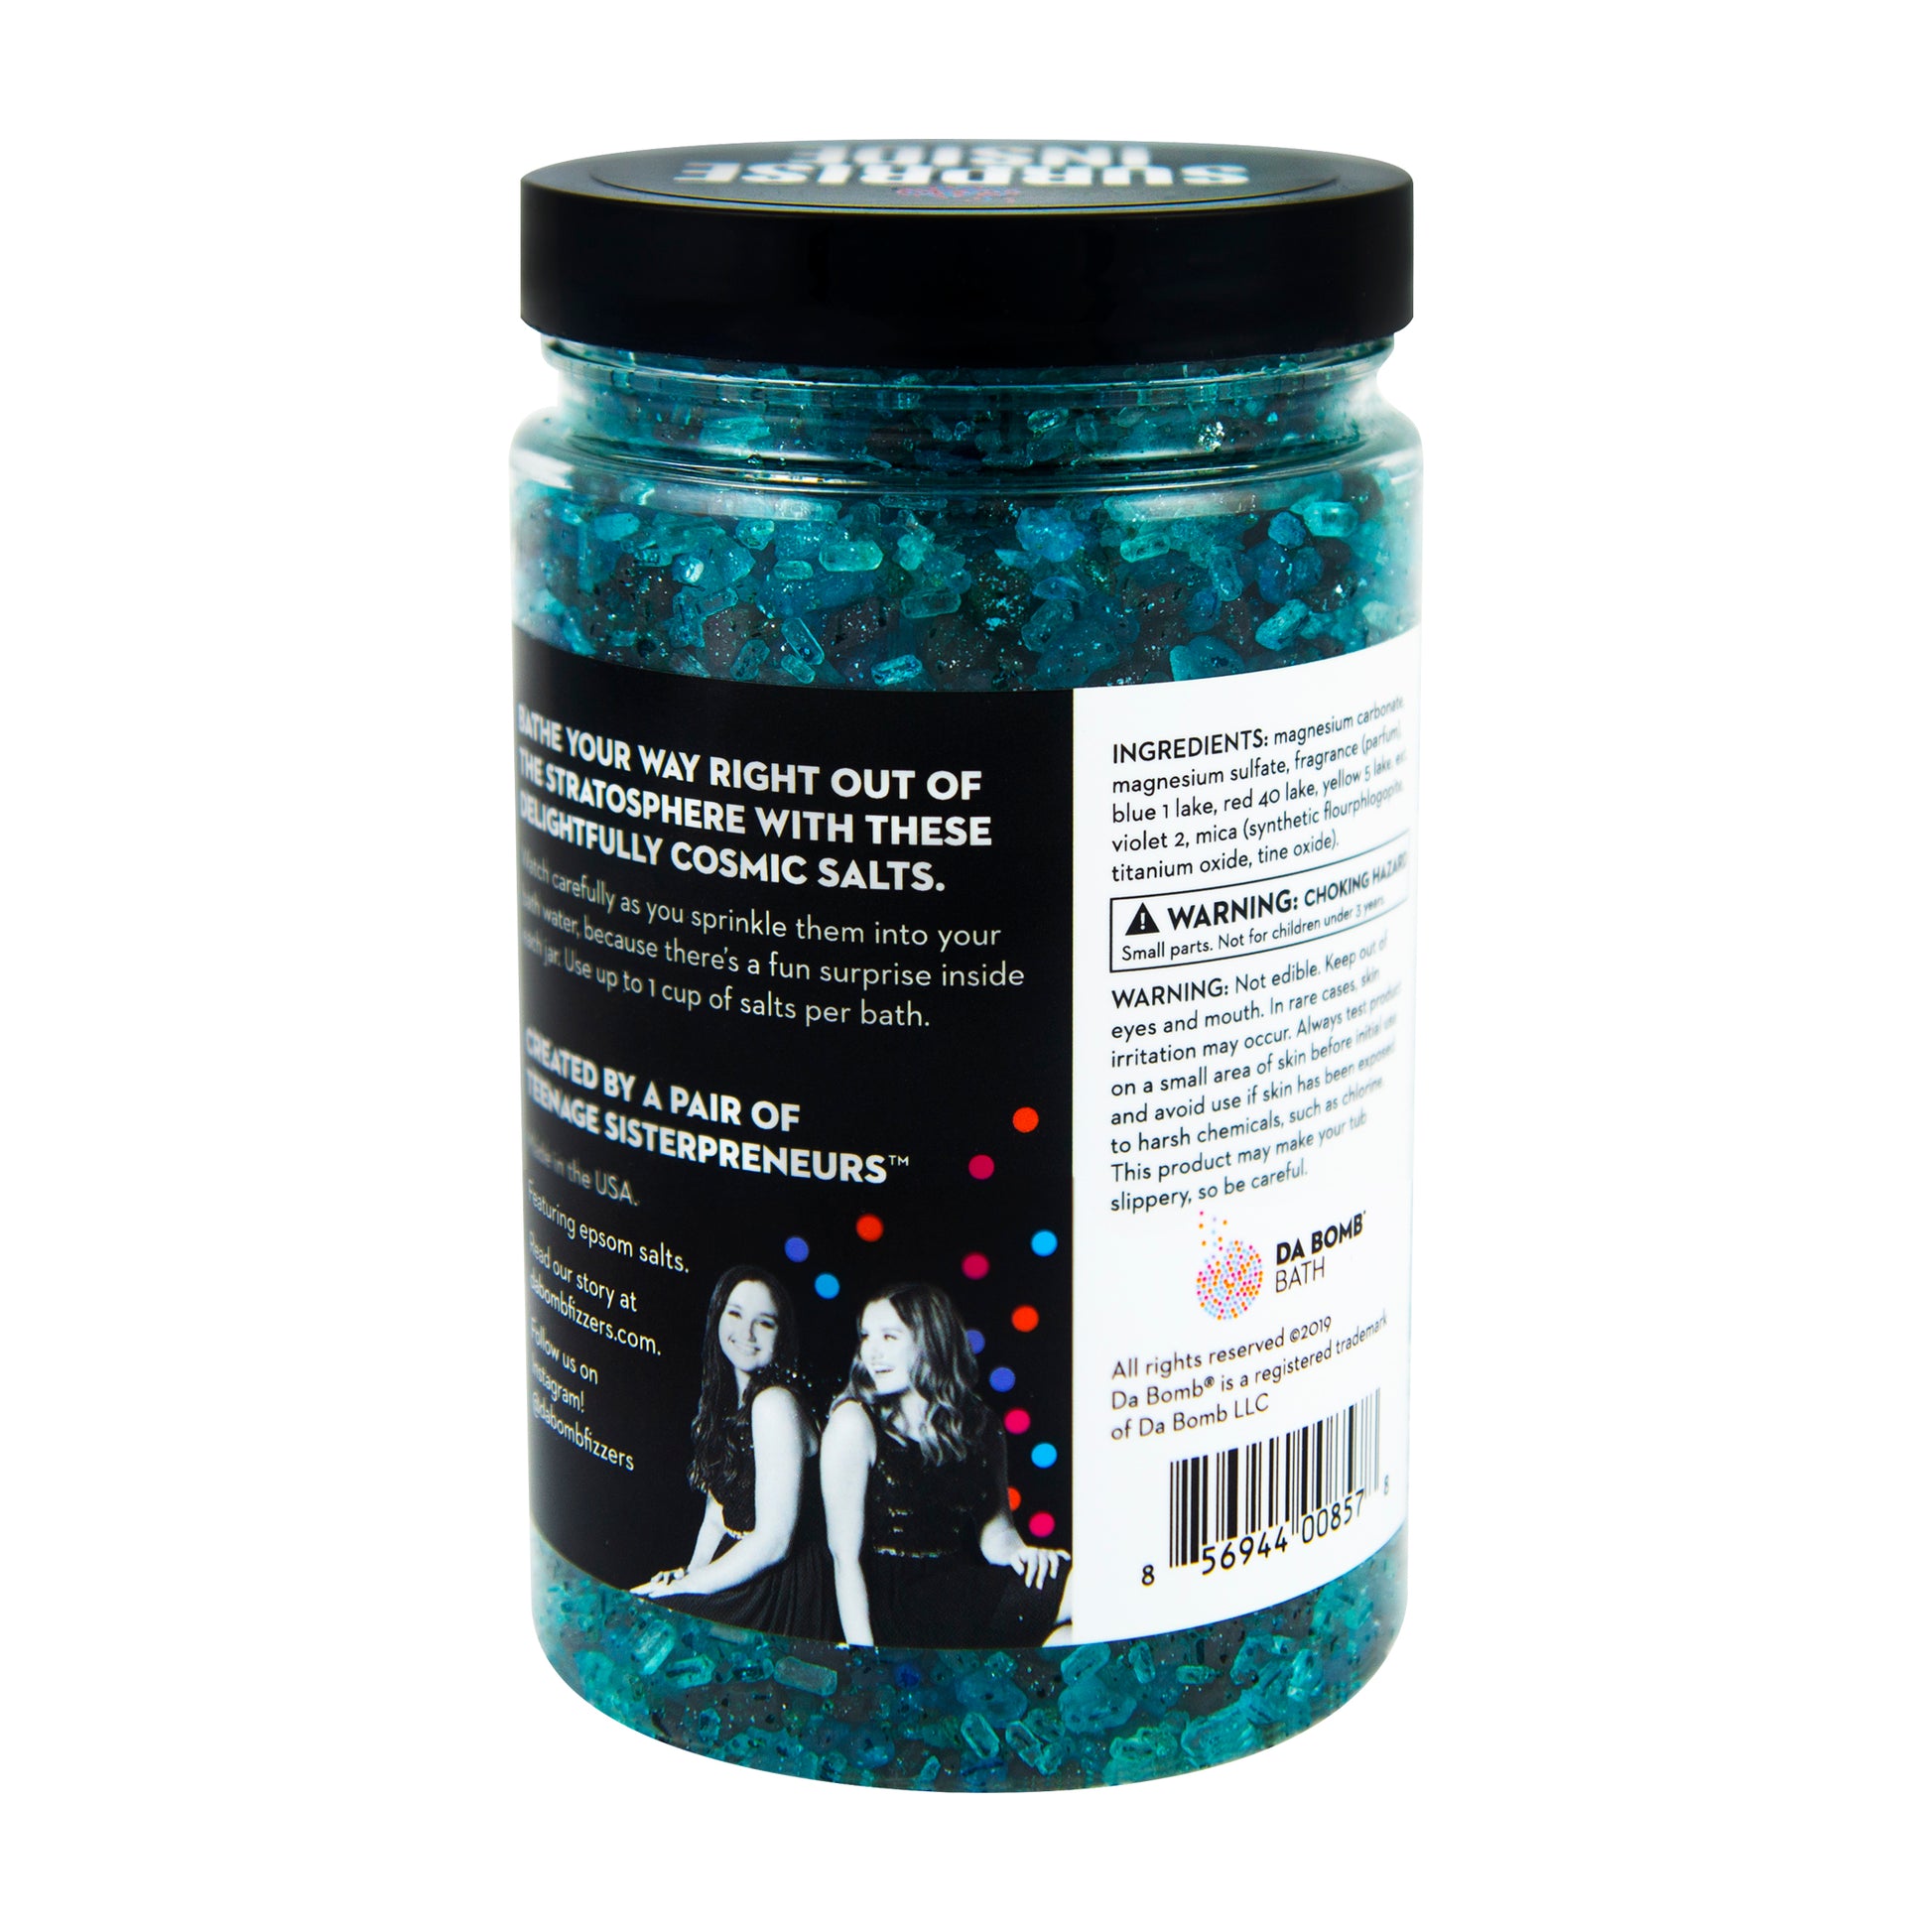 Back of clear plastic jar filled with black, blue and purple bath salt that smells like black amber. Each jar contains a fun surprise.